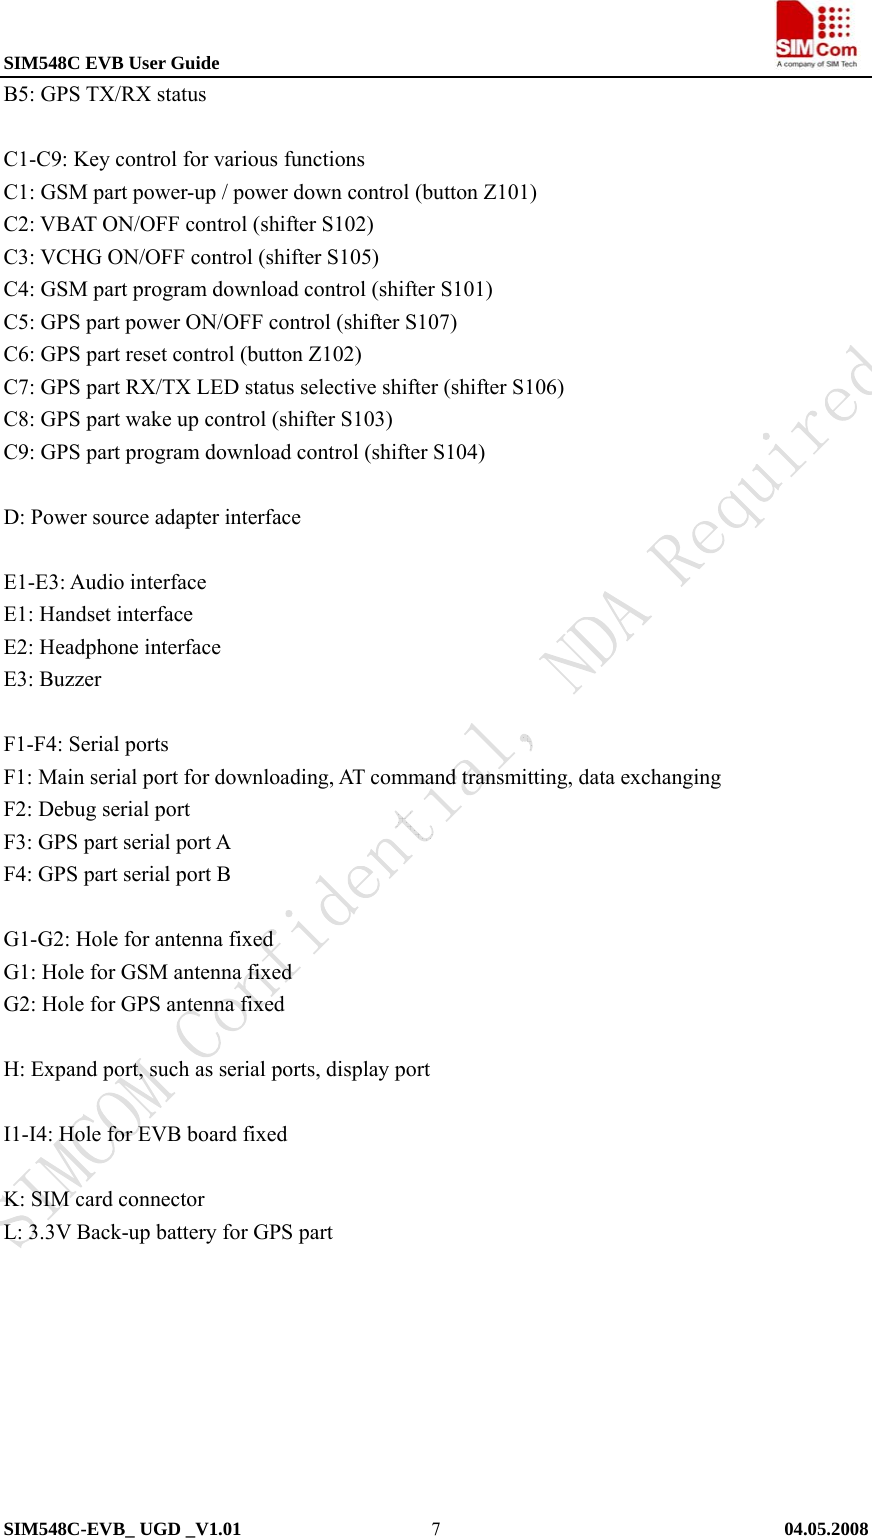 SIM548C EVB User Guide                                                             SIM548C-EVB_ UGD _V1.01   04.05.2008   7B5: GPS TX/RX status  C1-C9: Key control for various functions C1: GSM part power-up / power down control (button Z101) C2: VBAT ON/OFF control (shifter S102) C3: VCHG ON/OFF control (shifter S105) C4: GSM part program download control (shifter S101) C5: GPS part power ON/OFF control (shifter S107) C6: GPS part reset control (button Z102) C7: GPS part RX/TX LED status selective shifter (shifter S106) C8: GPS part wake up control (shifter S103) C9: GPS part program download control (shifter S104)  D: Power source adapter interface  E1-E3: Audio interface E1: Handset interface E2: Headphone interface   E3: Buzzer  F1-F4: Serial ports F1: Main serial port for downloading, AT command transmitting, data exchanging F2: Debug serial port F3: GPS part serial port A F4: GPS part serial port B  G1-G2: Hole for antenna fixed G1: Hole for GSM antenna fixed   G2: Hole for GPS antenna fixed  H: Expand port, such as serial ports, display port  I1-I4: Hole for EVB board fixed    K: SIM card connector   L: 3.3V Back-up battery for GPS part 